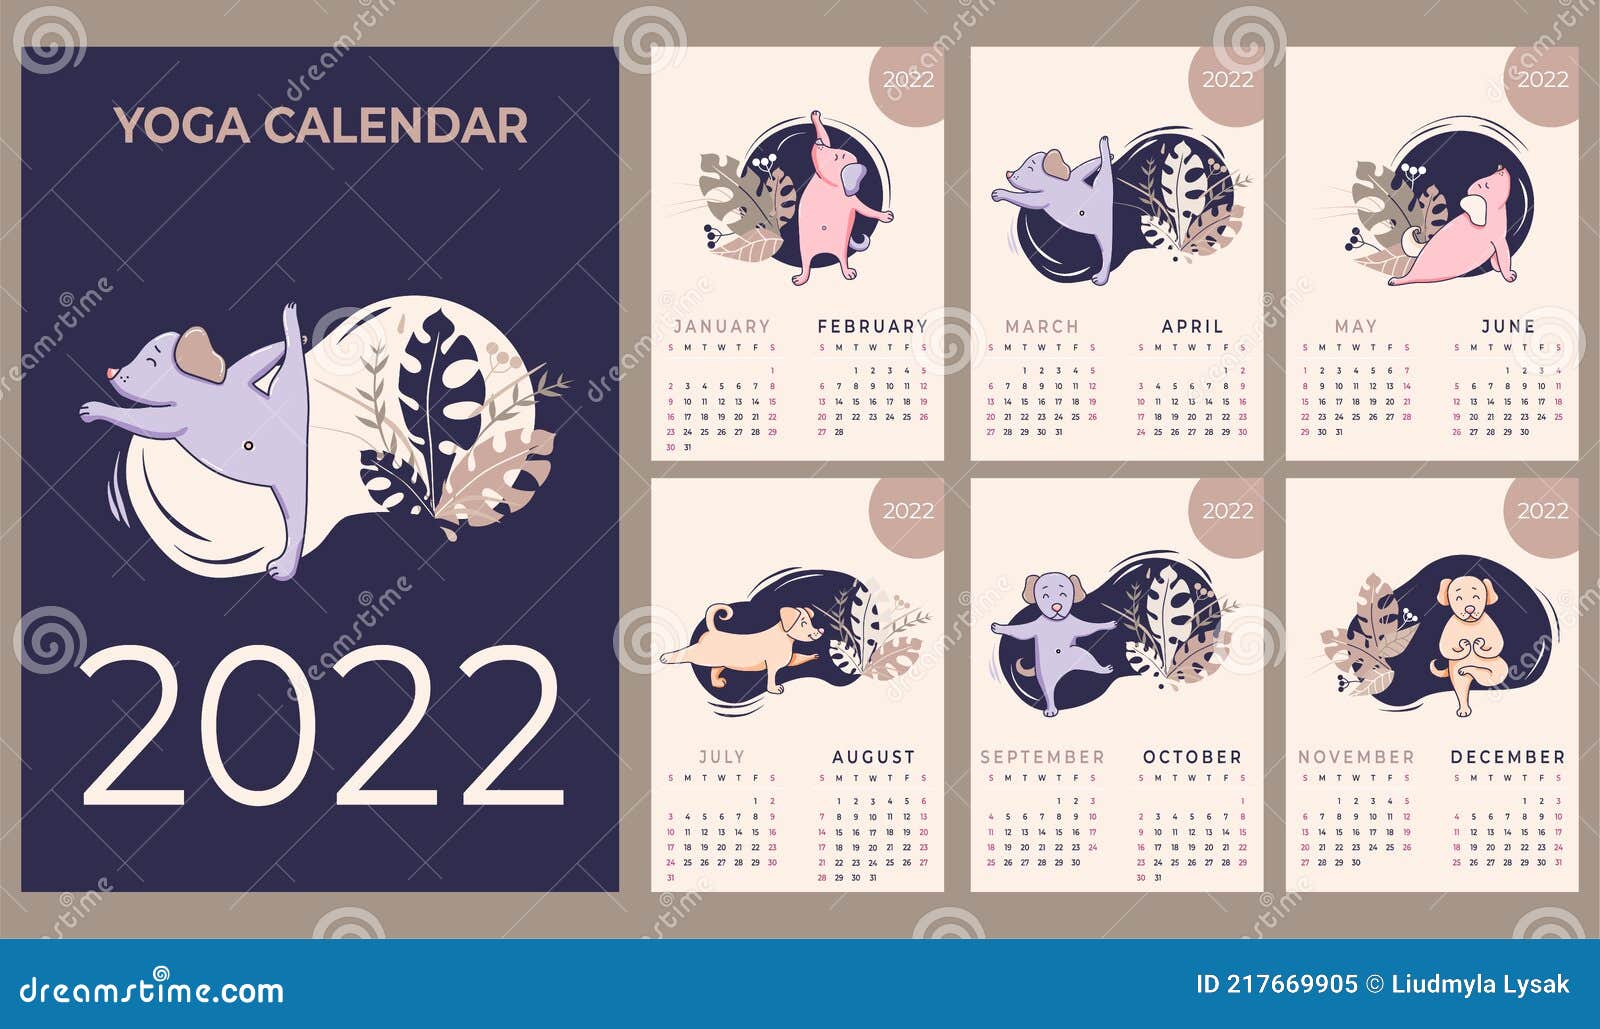 Cute 2022 Calendar Calendar 2022. Yearly Calendar. Concept Design - Yoga For Pets. Vector. Set  Of Templates For 12 Months 2022 With Cute Stock Vector - Illustration Of  Sport, Business: 217669905